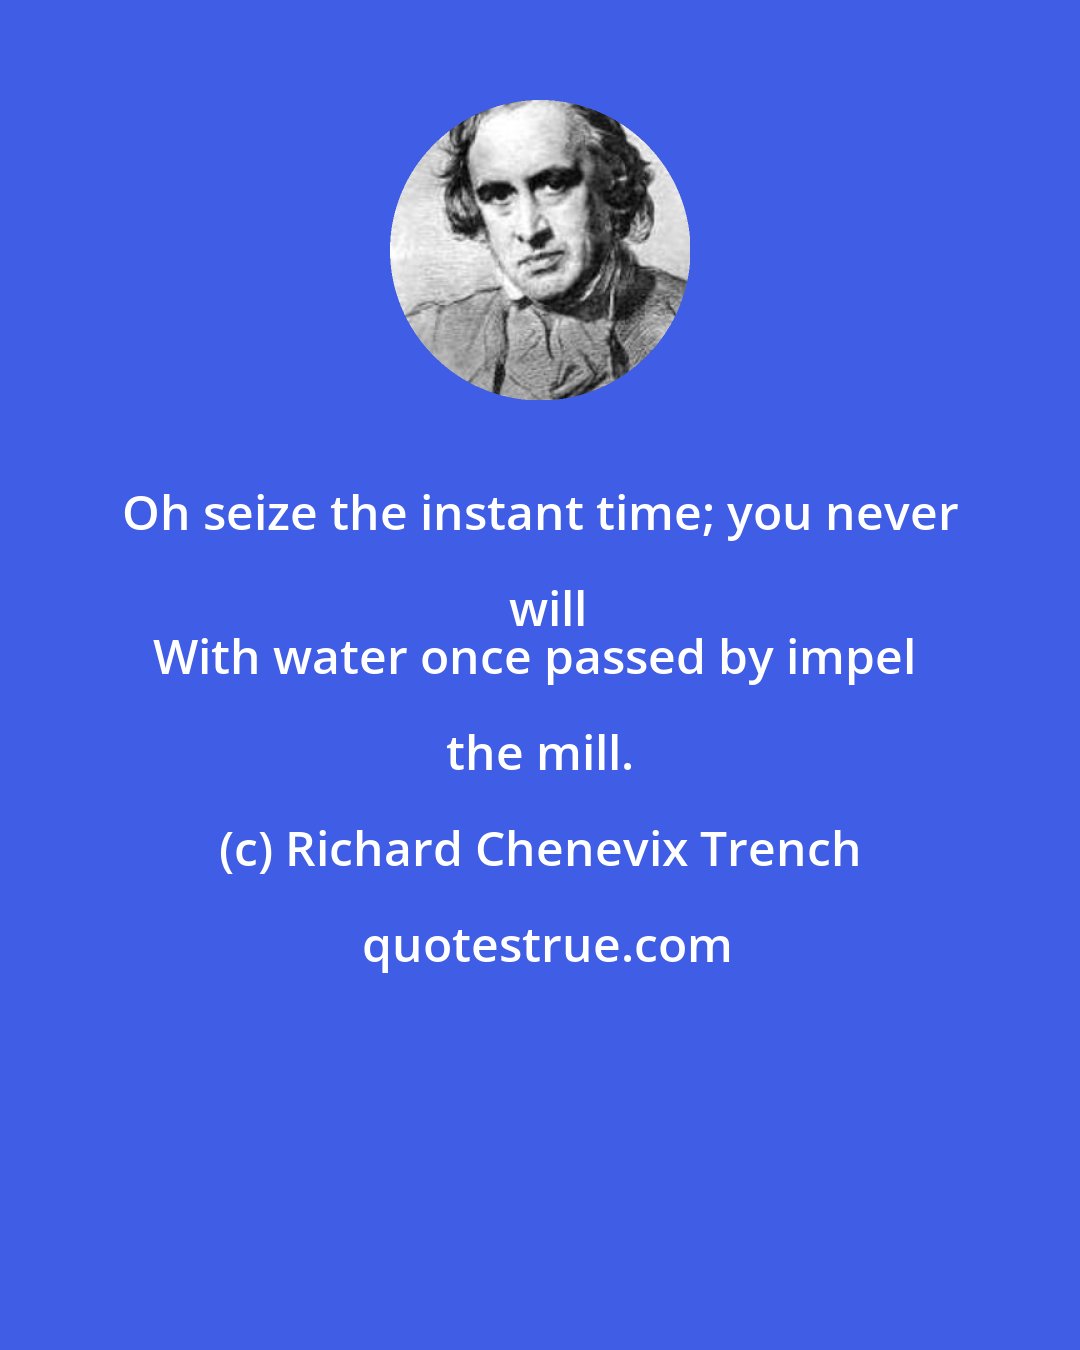 Richard Chenevix Trench: Oh seize the instant time; you never will
With water once passed by impel the mill.